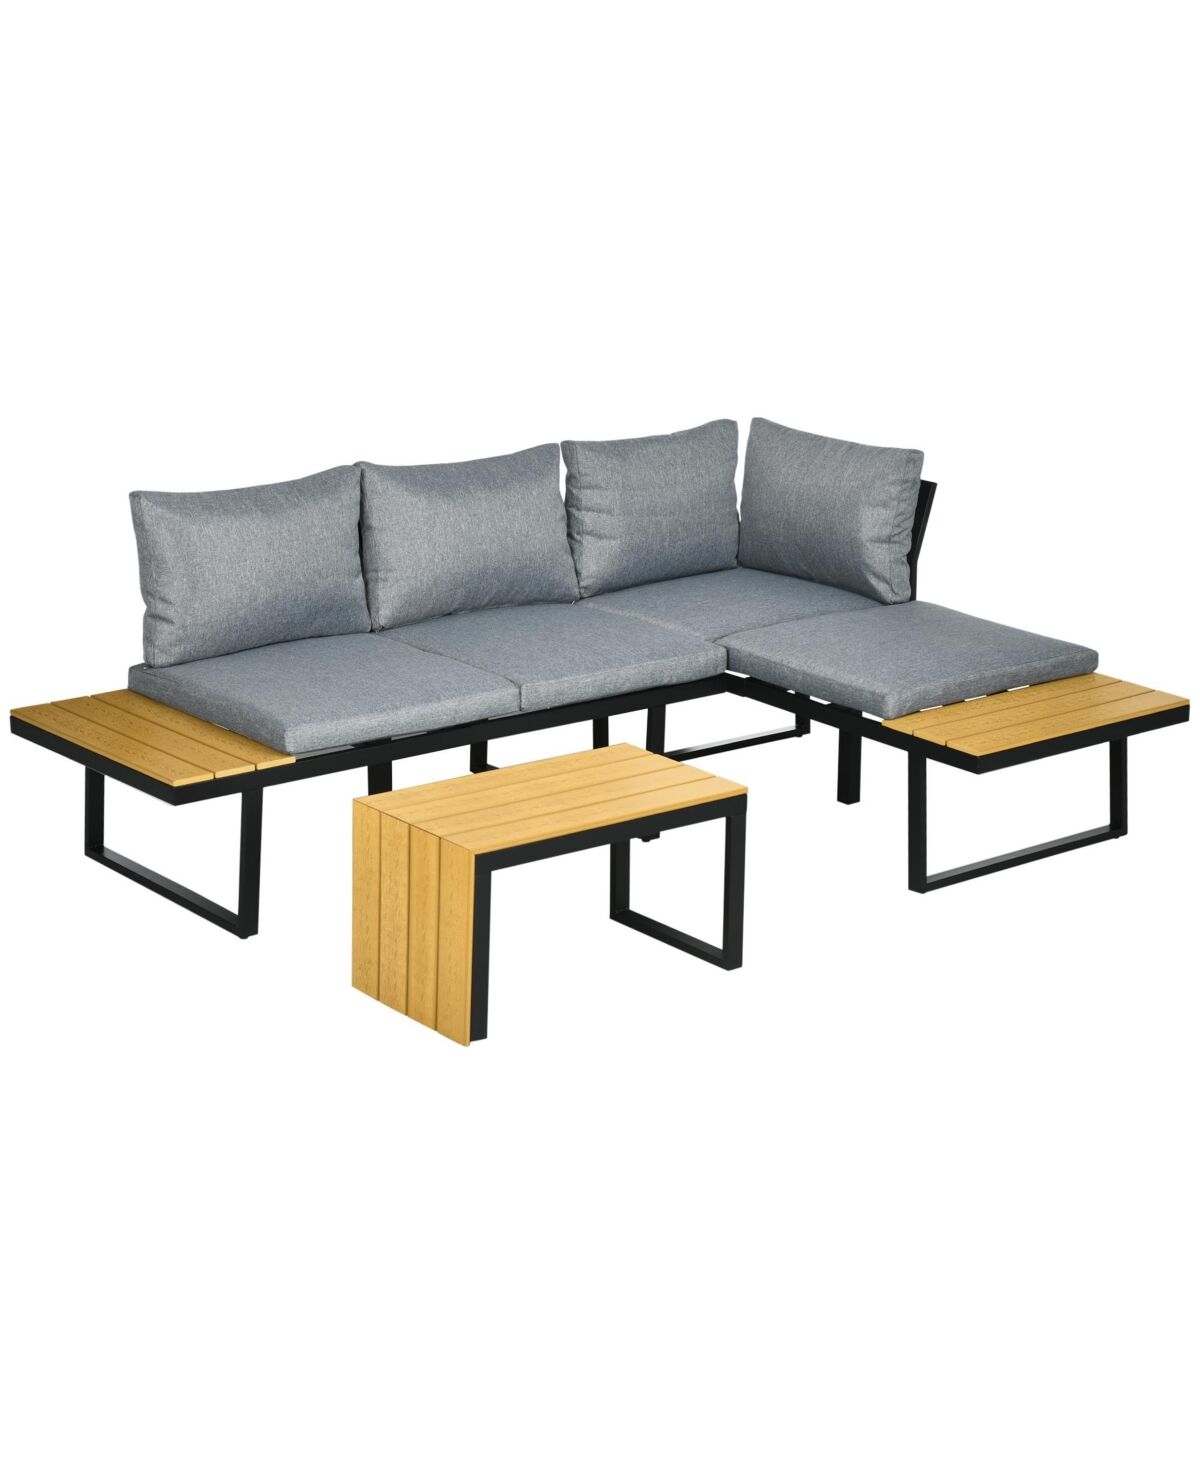 Outsunny 3 Piece Patio Furniture Set, Outdoor Sofa Set with Chaise Lounge & Loveseat, Soft Cushions, Woodgrain Plastic Table, L-Shaped Sectional Couch